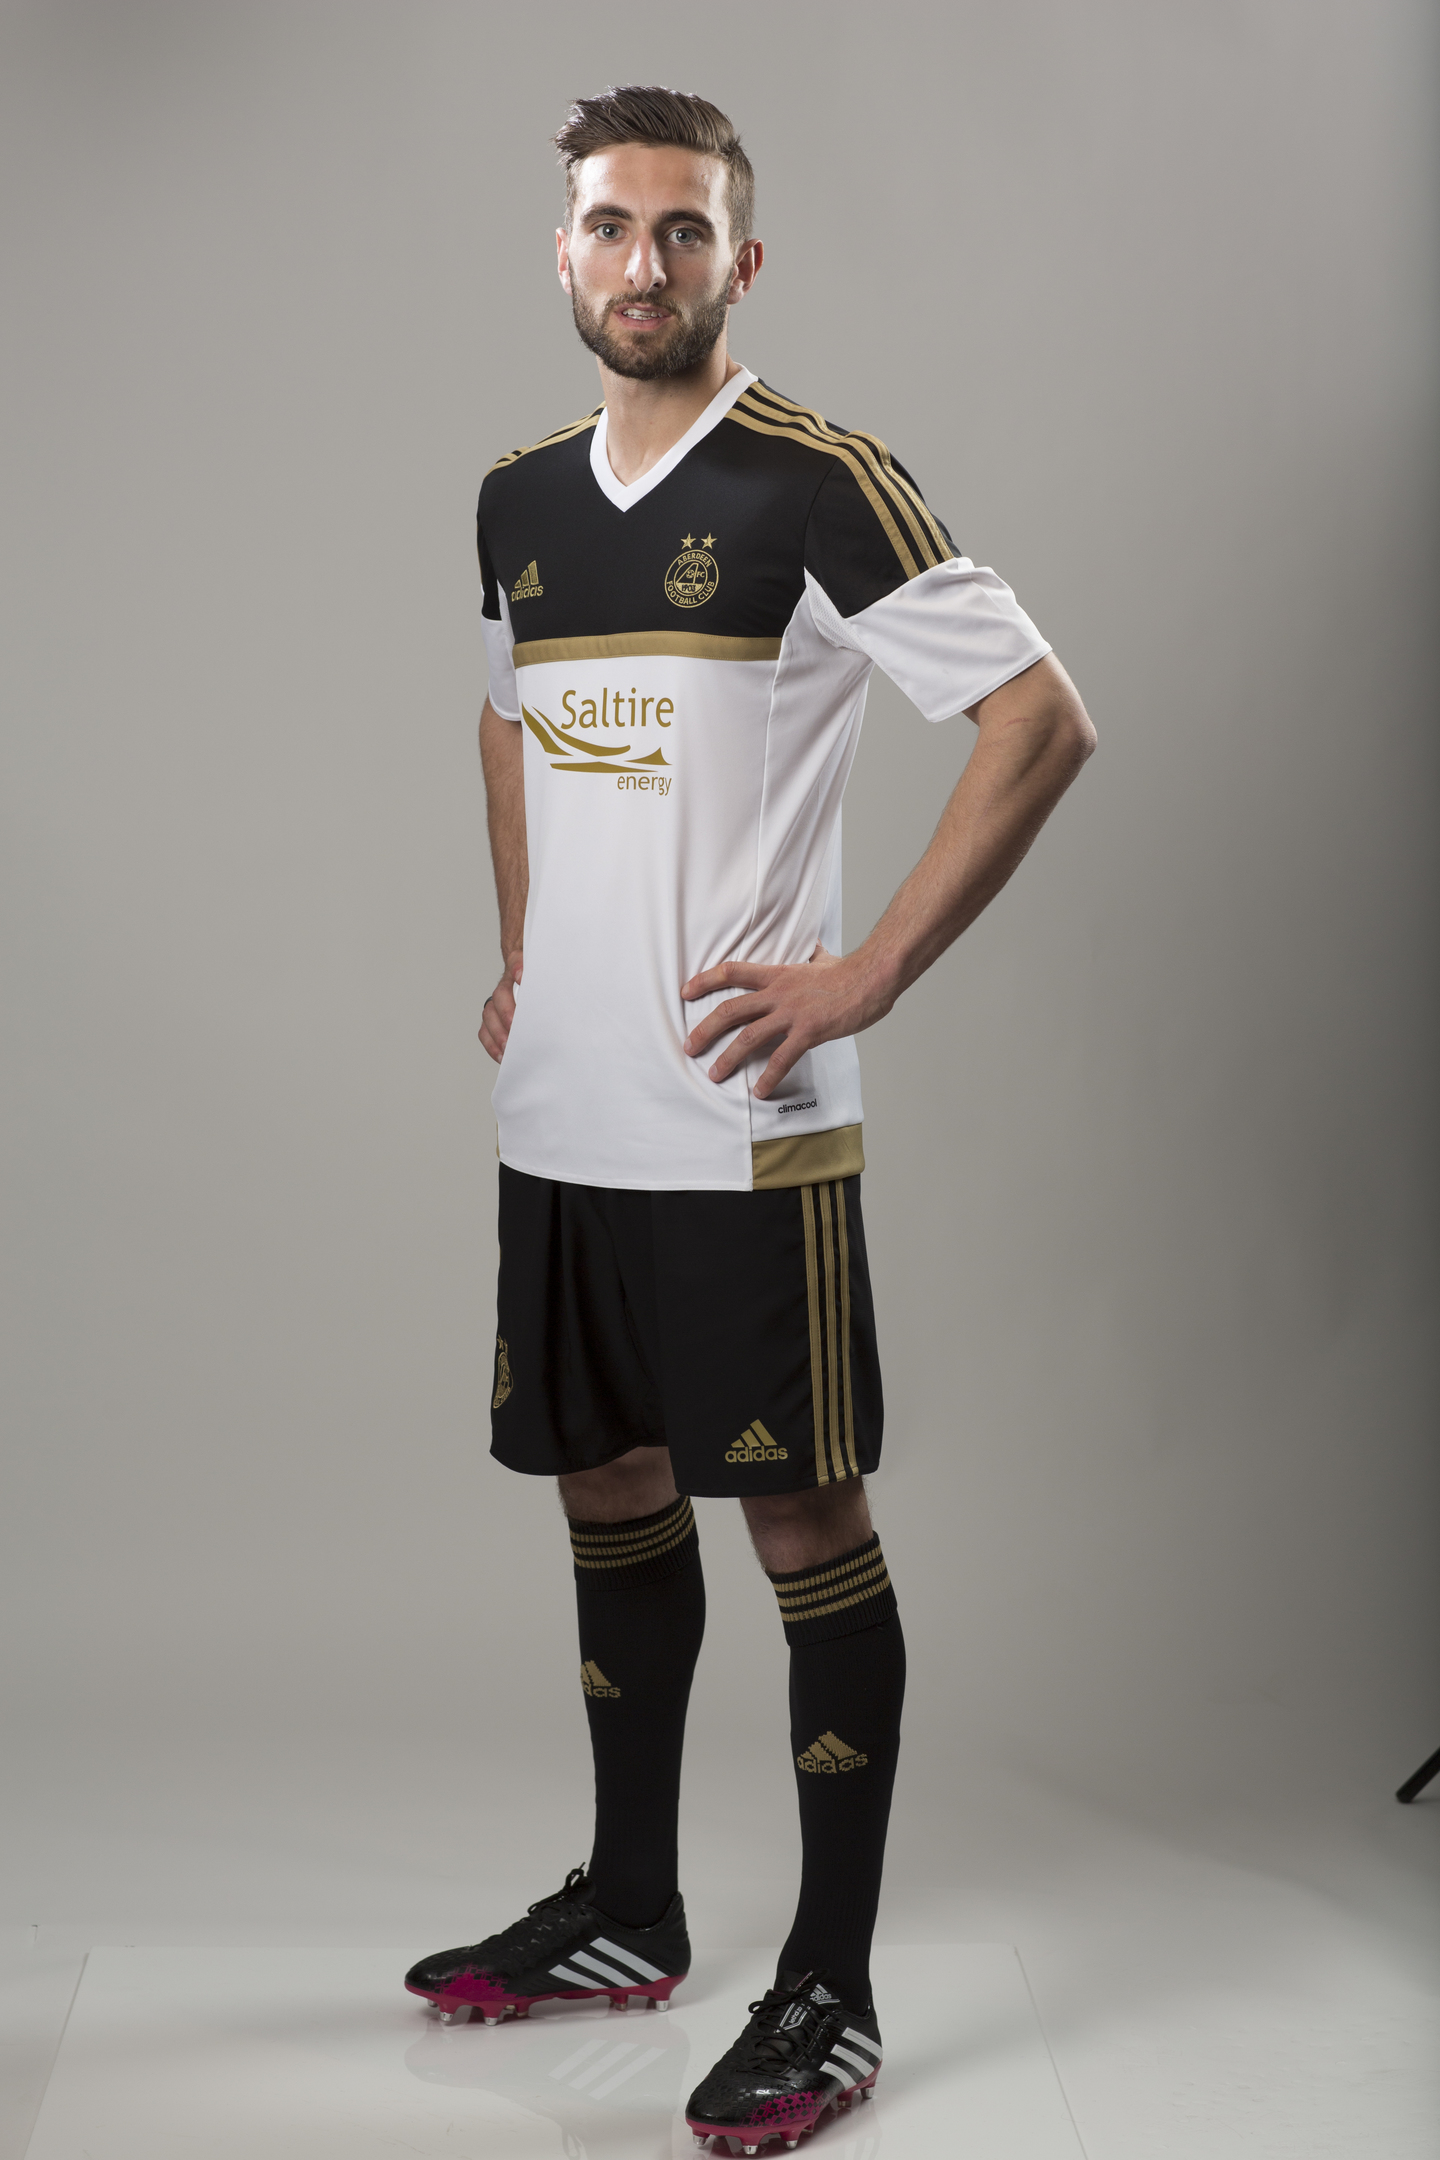 New left back Graeme Shinnie in the new kit